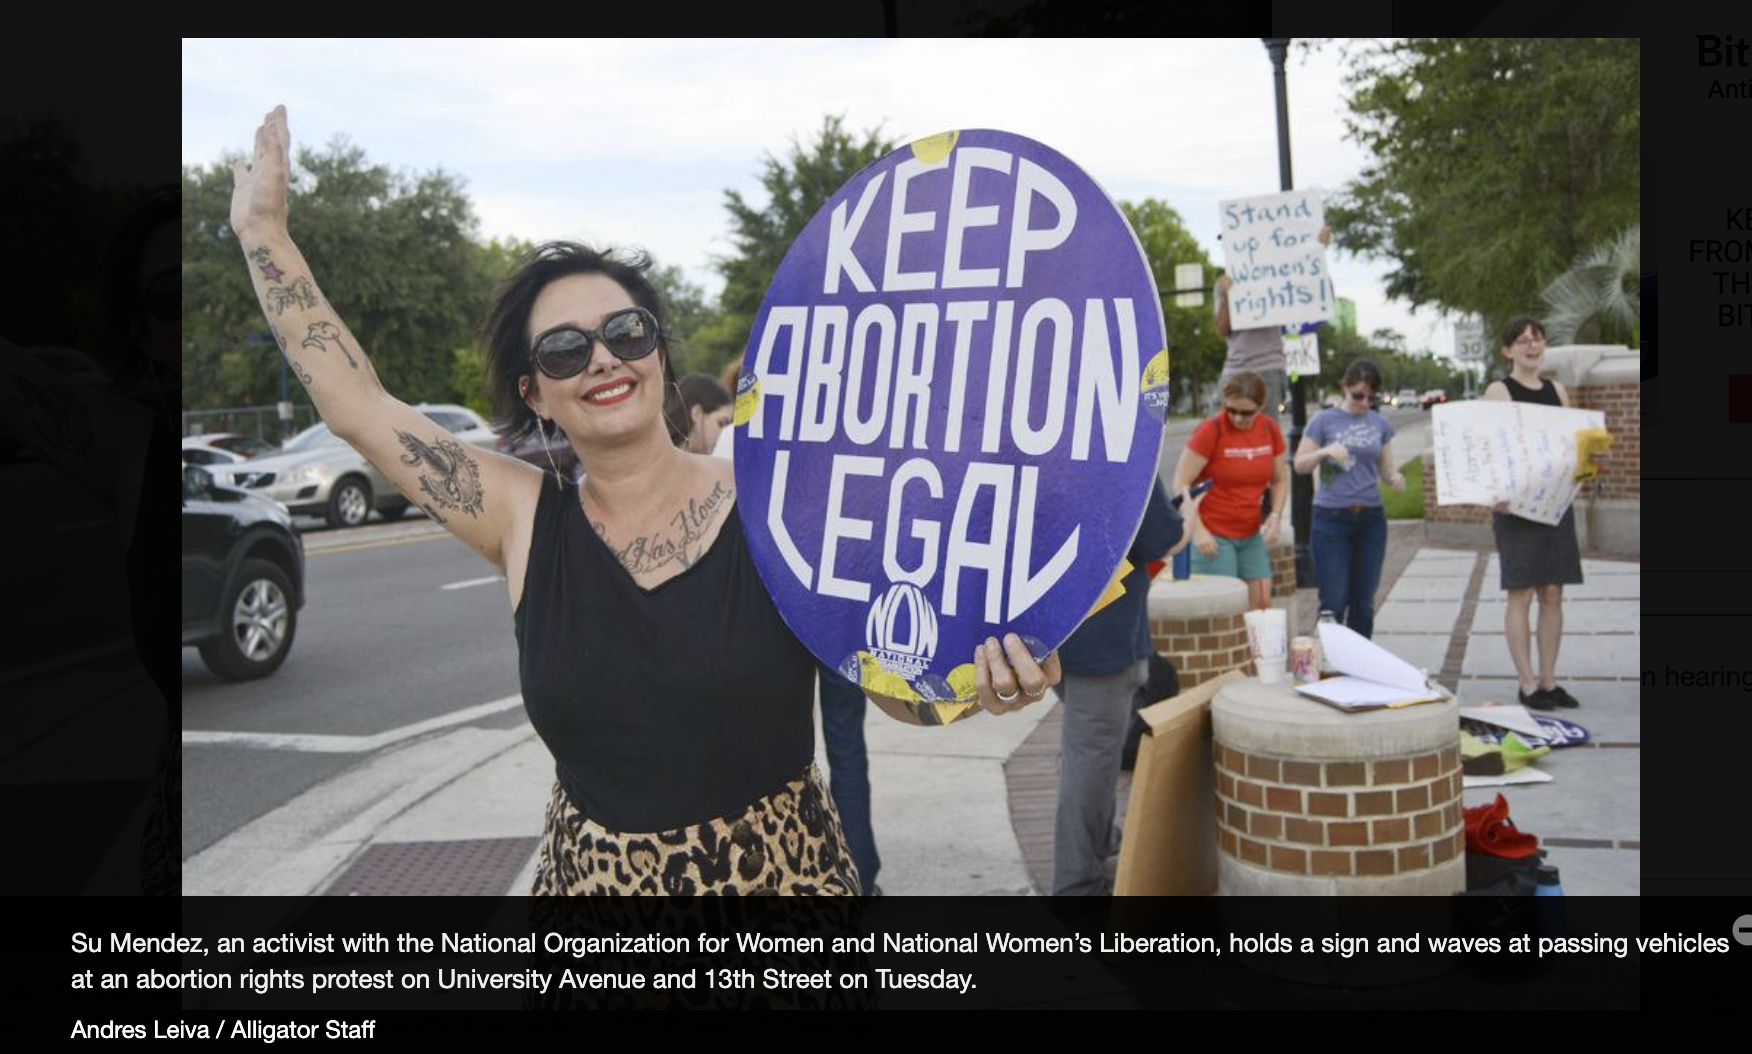 Sue Mendez waves at cars with Keep Abortion Legal sign